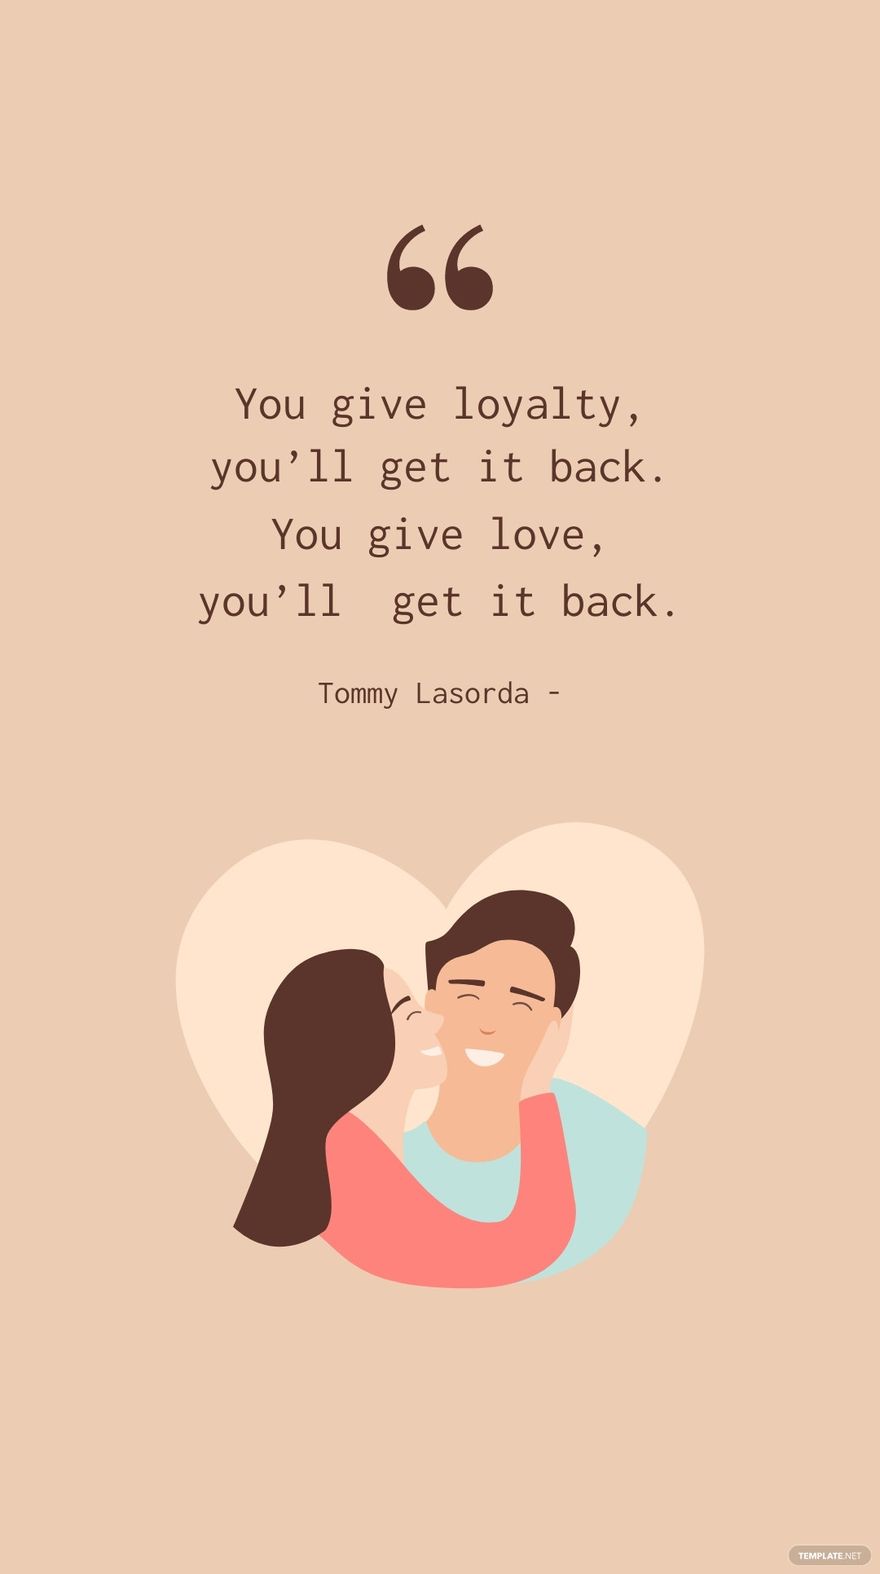 Tommy Lasorda - You give loyalty, you’ll get it back. You give love, you’ll  get it back. in JPG